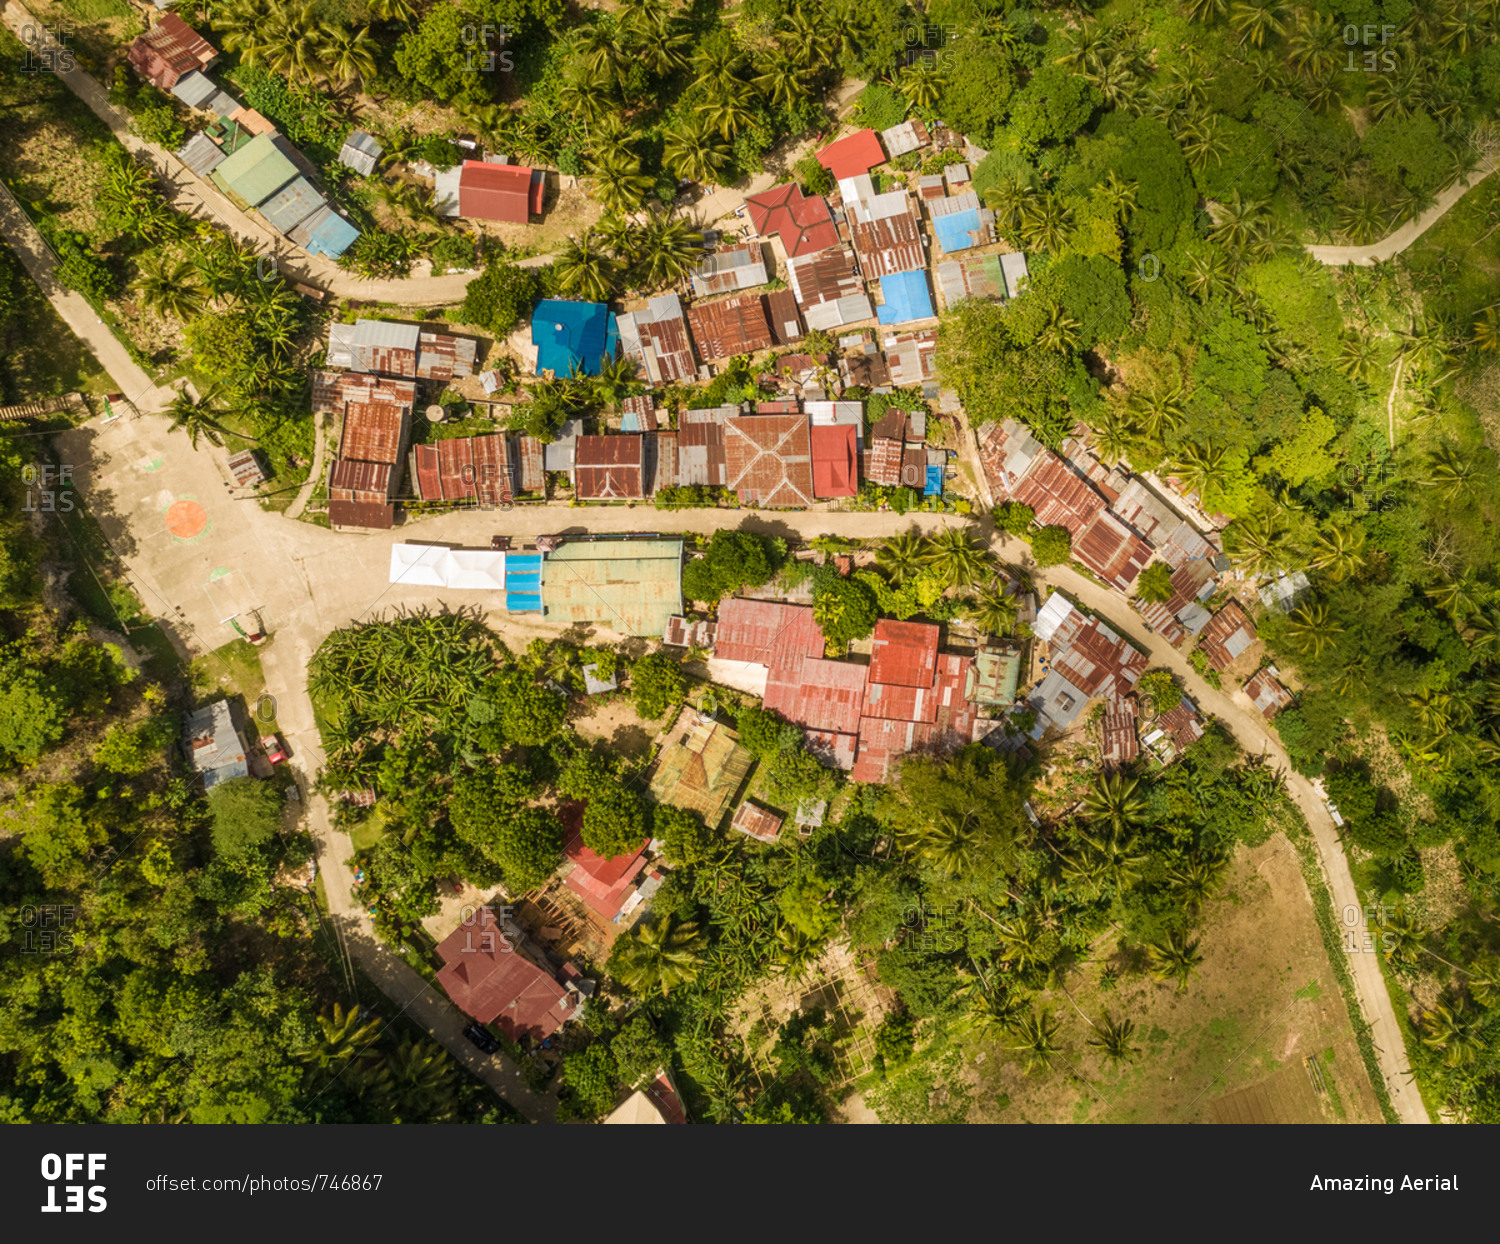 Aerial view of colorful rooftops and road in Dalaguete, Philippines.